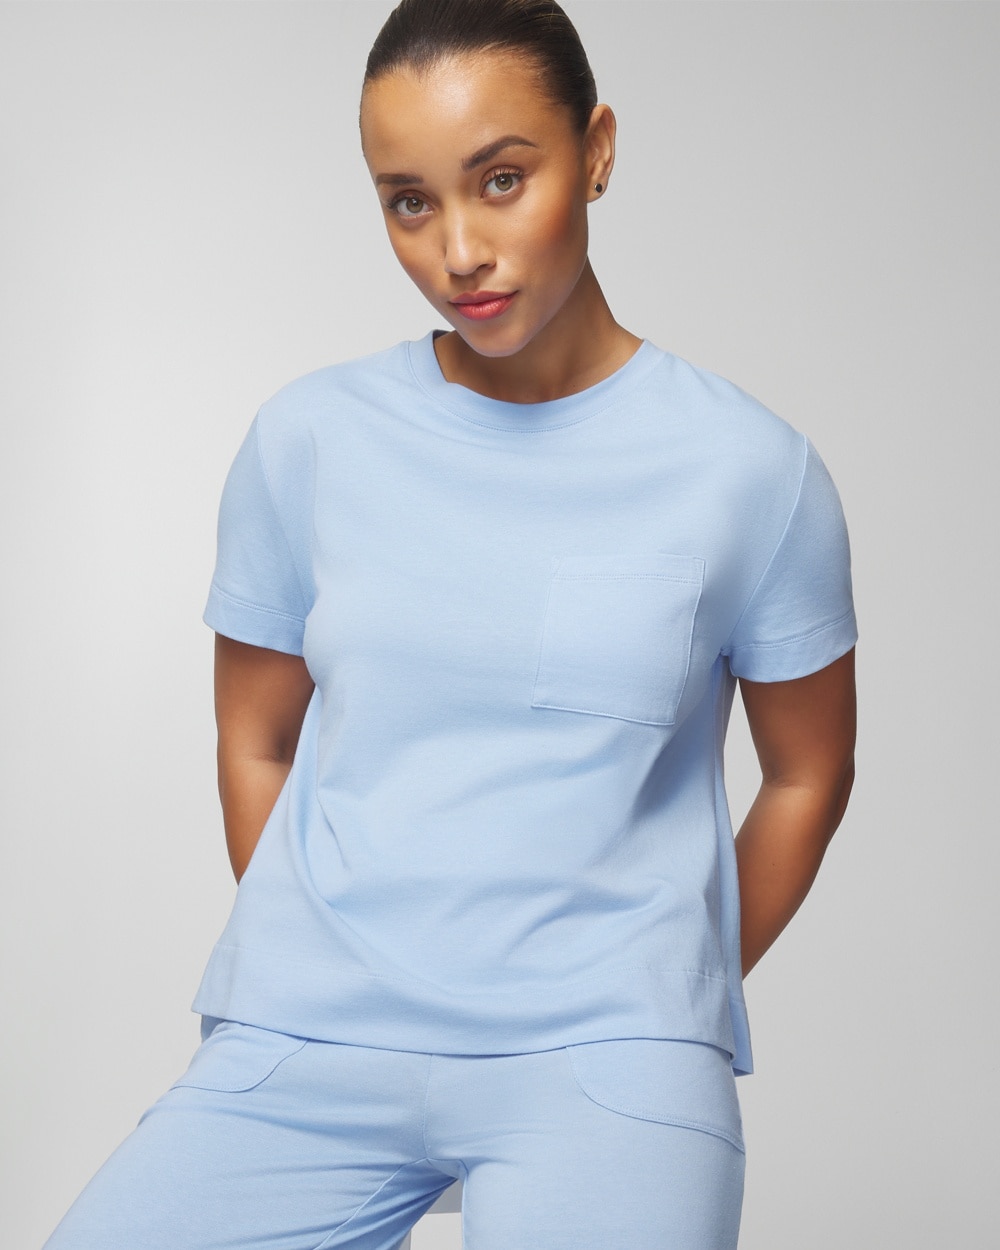 Most Loved Cotton Short-Sleeve Pocket Tee